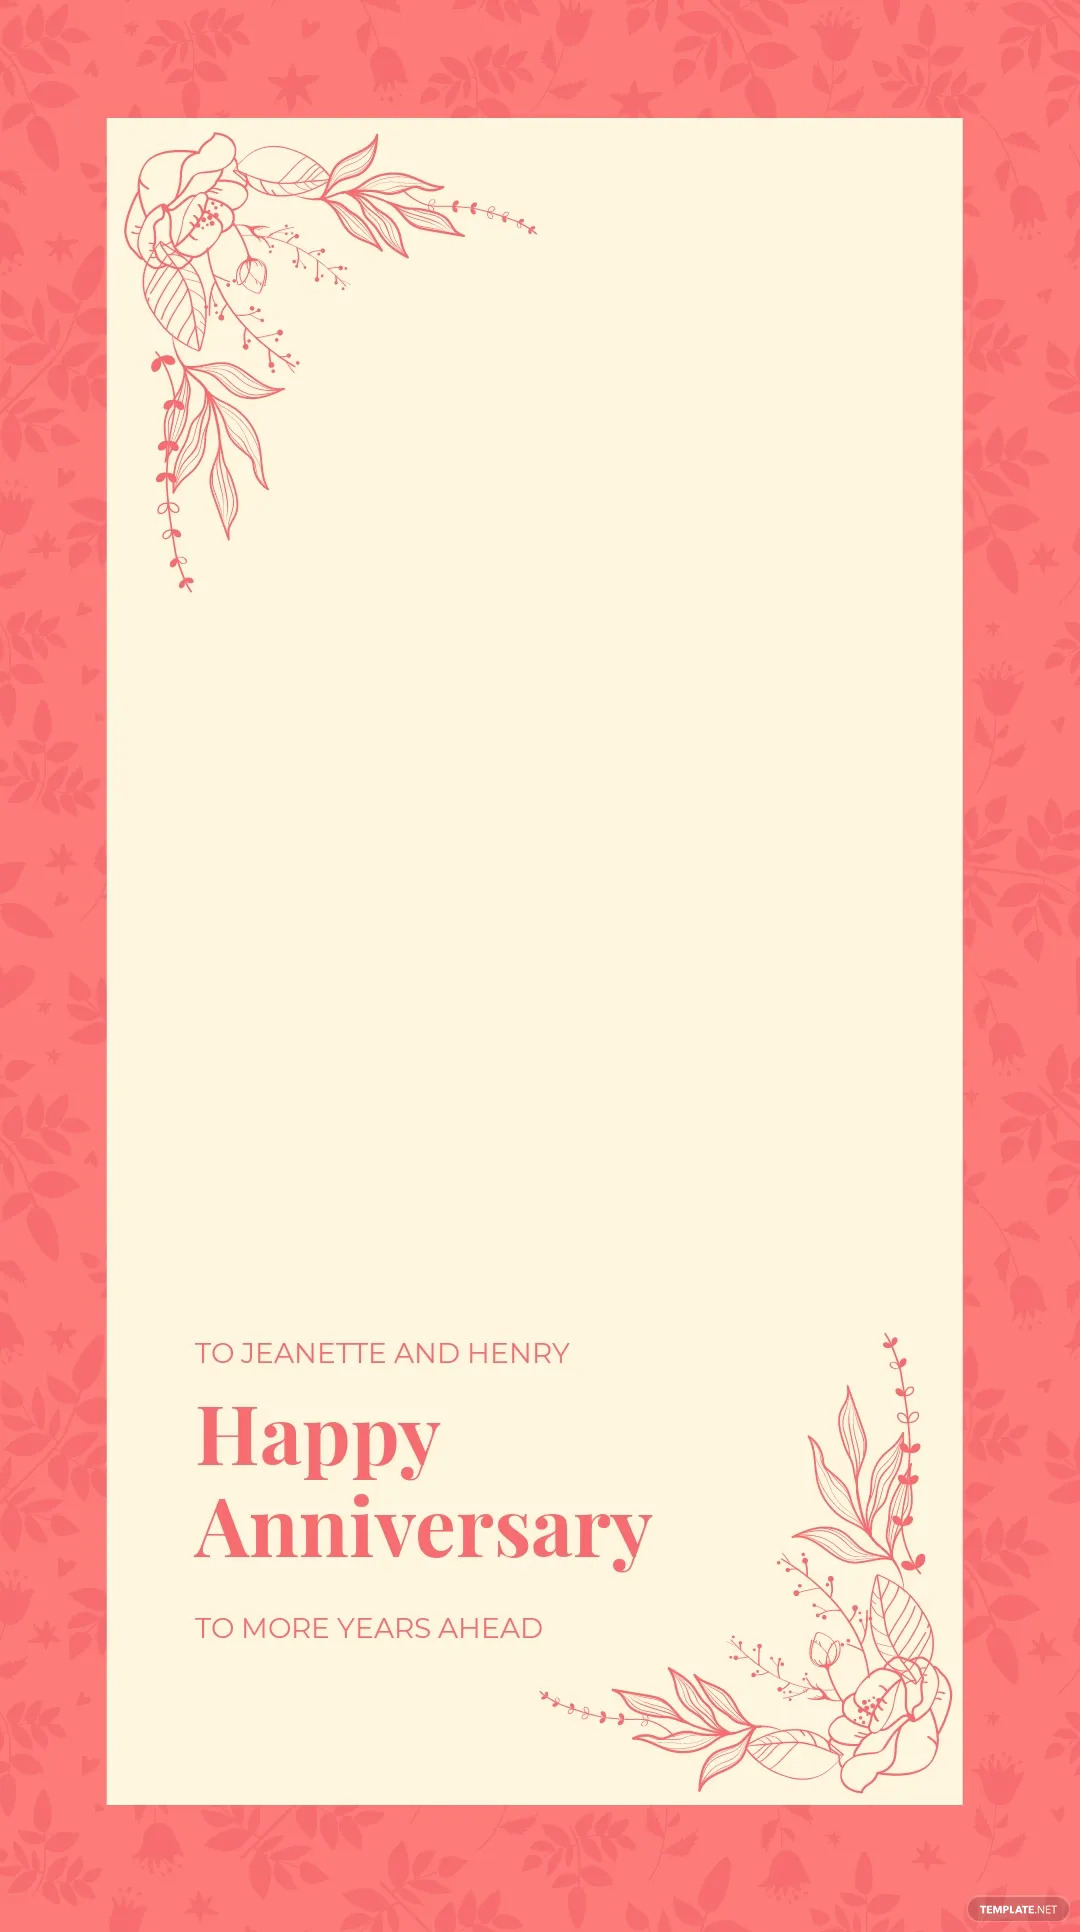 anniversary snapchat geofilter ideas and examples